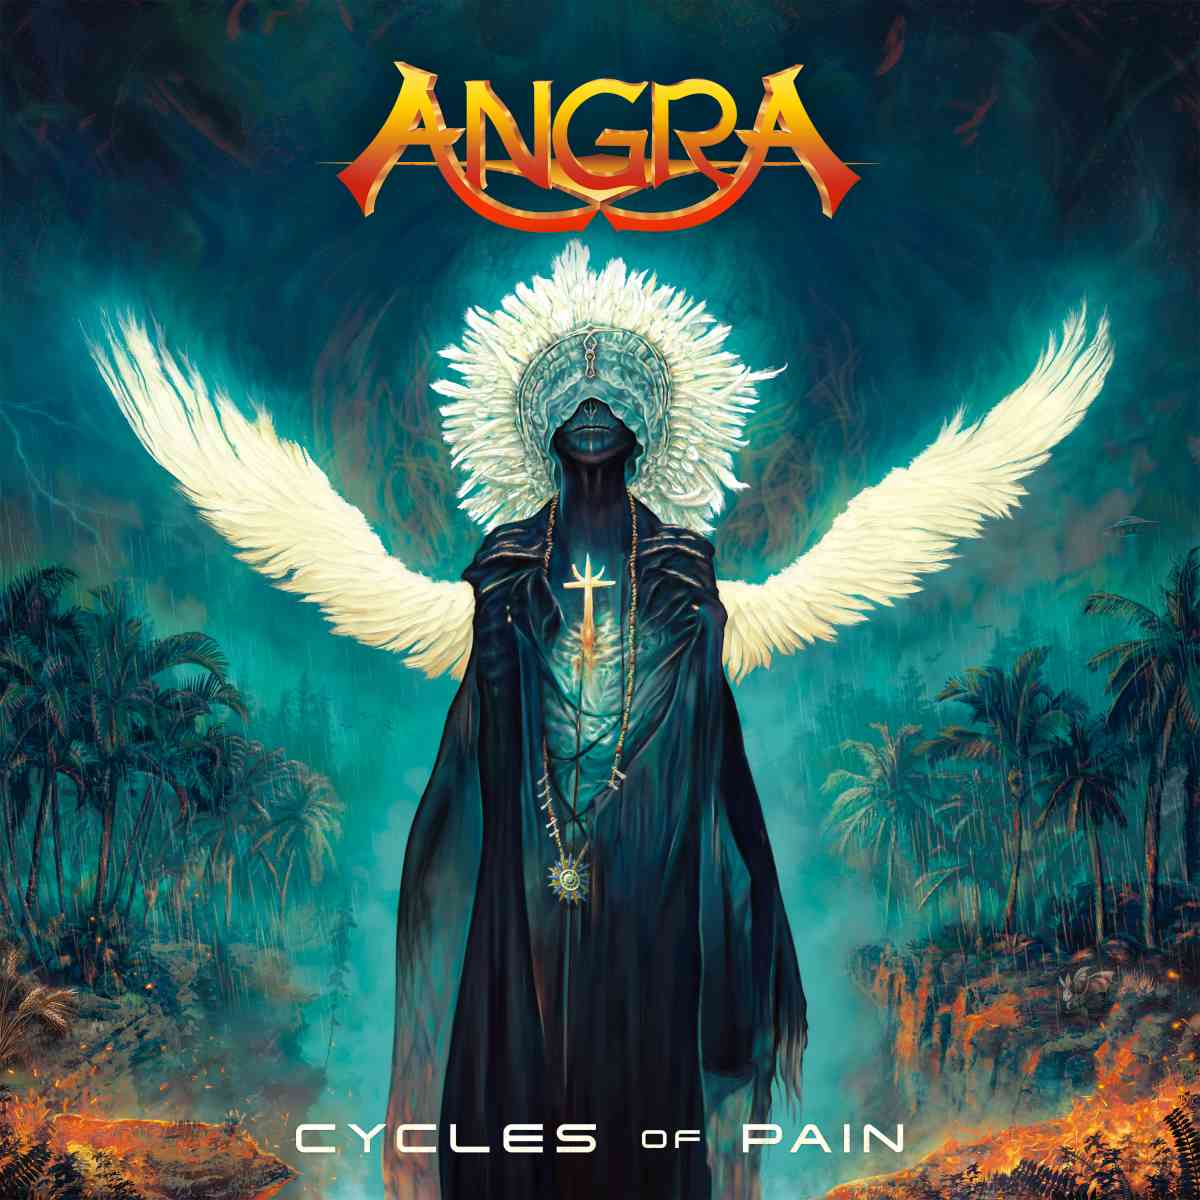 angra - Cycles of Pain - album cover